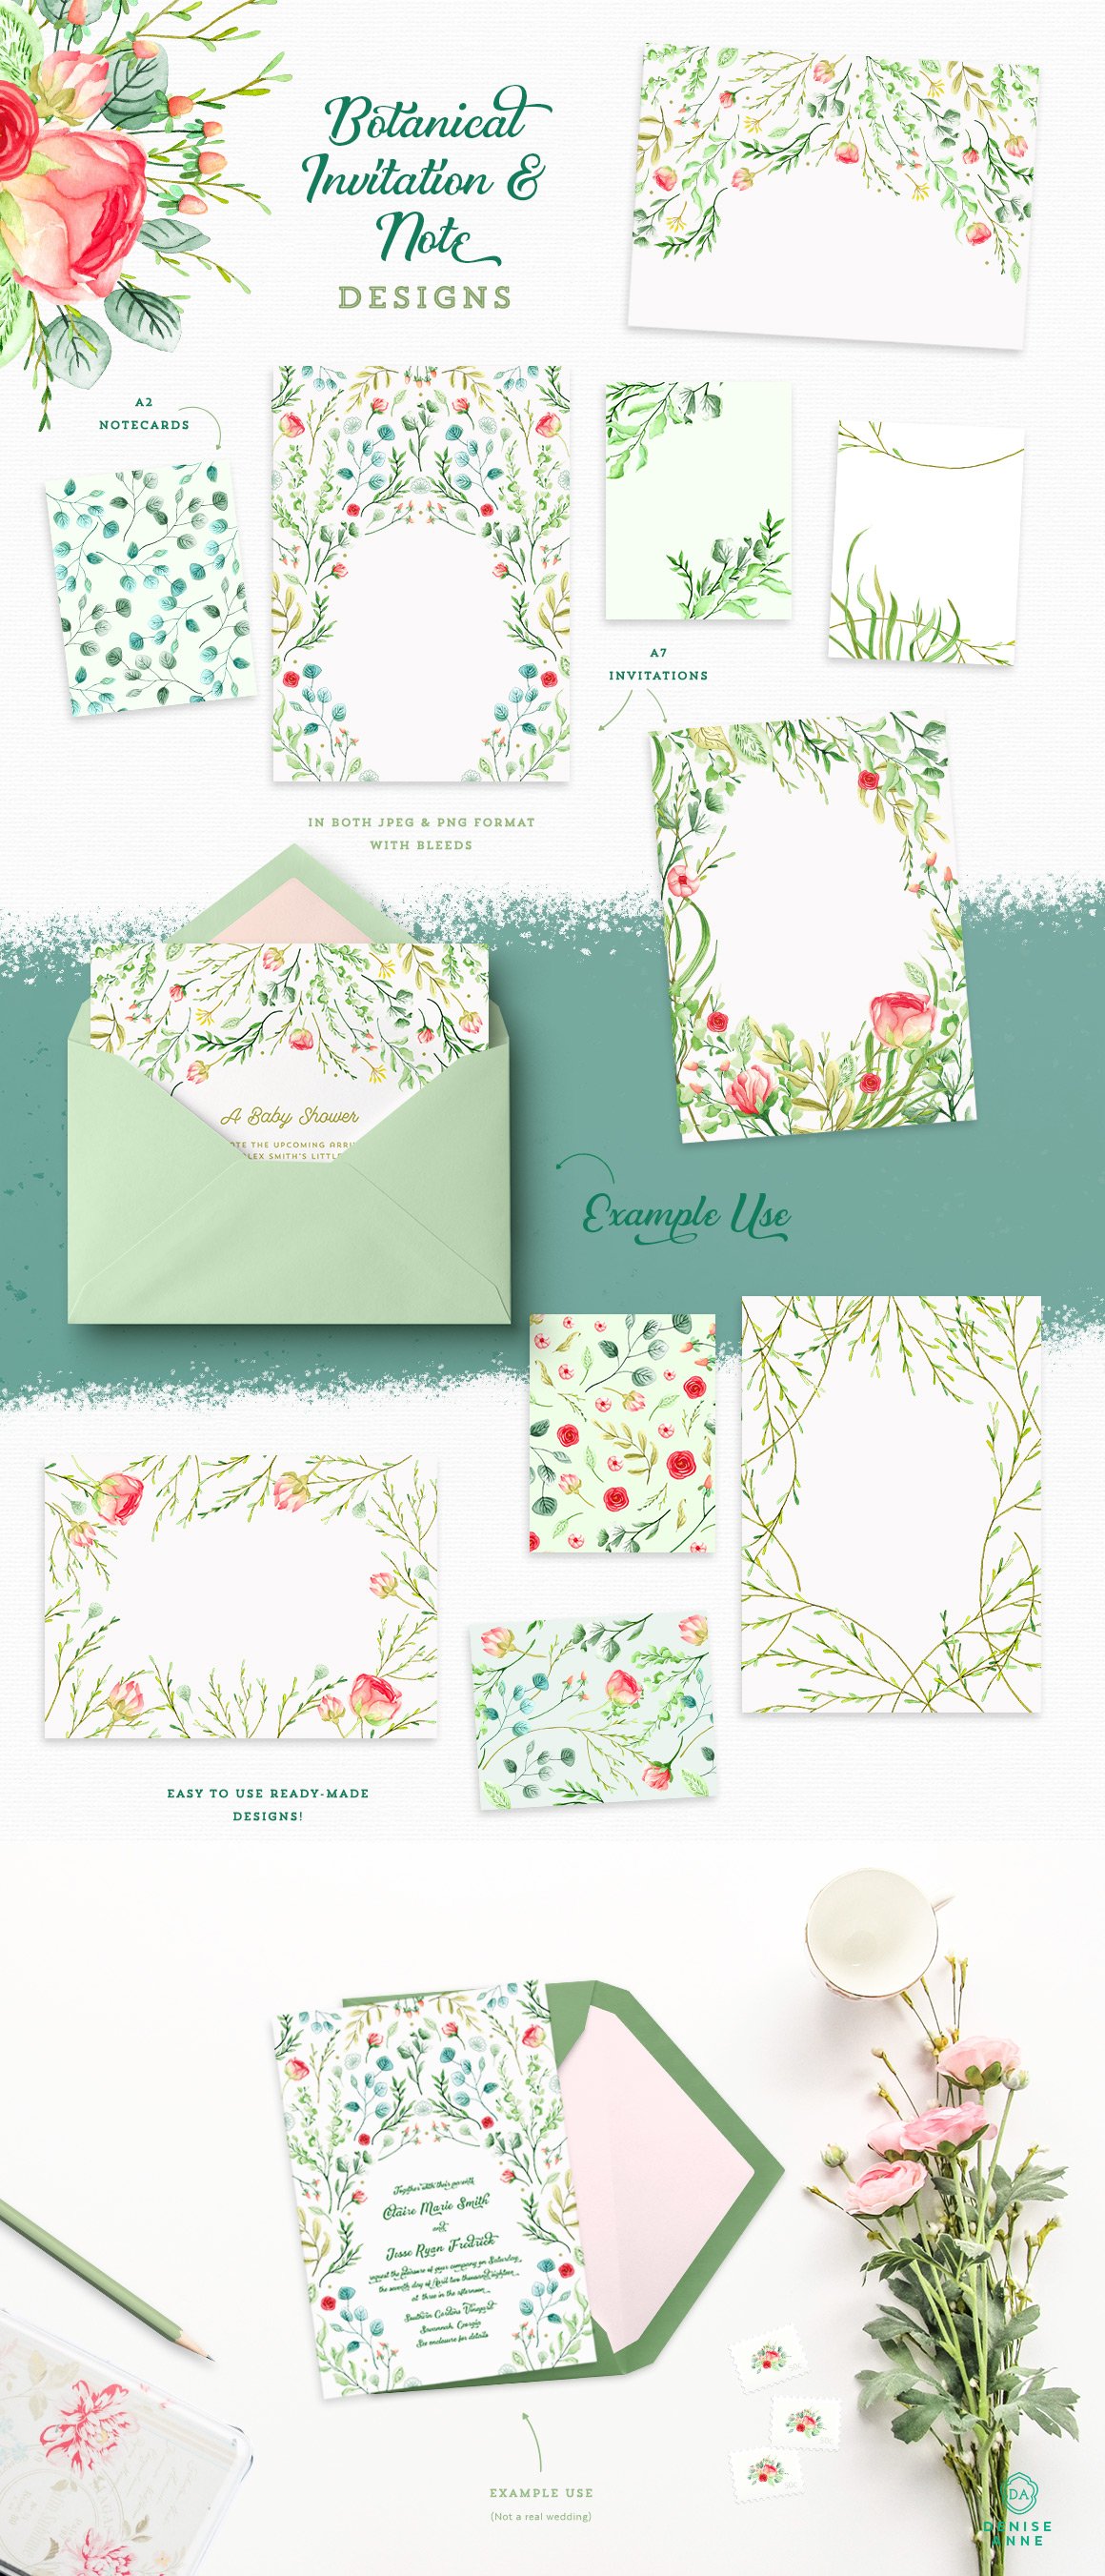 Sweetly Southern Garden Watercolor Floral Graphics